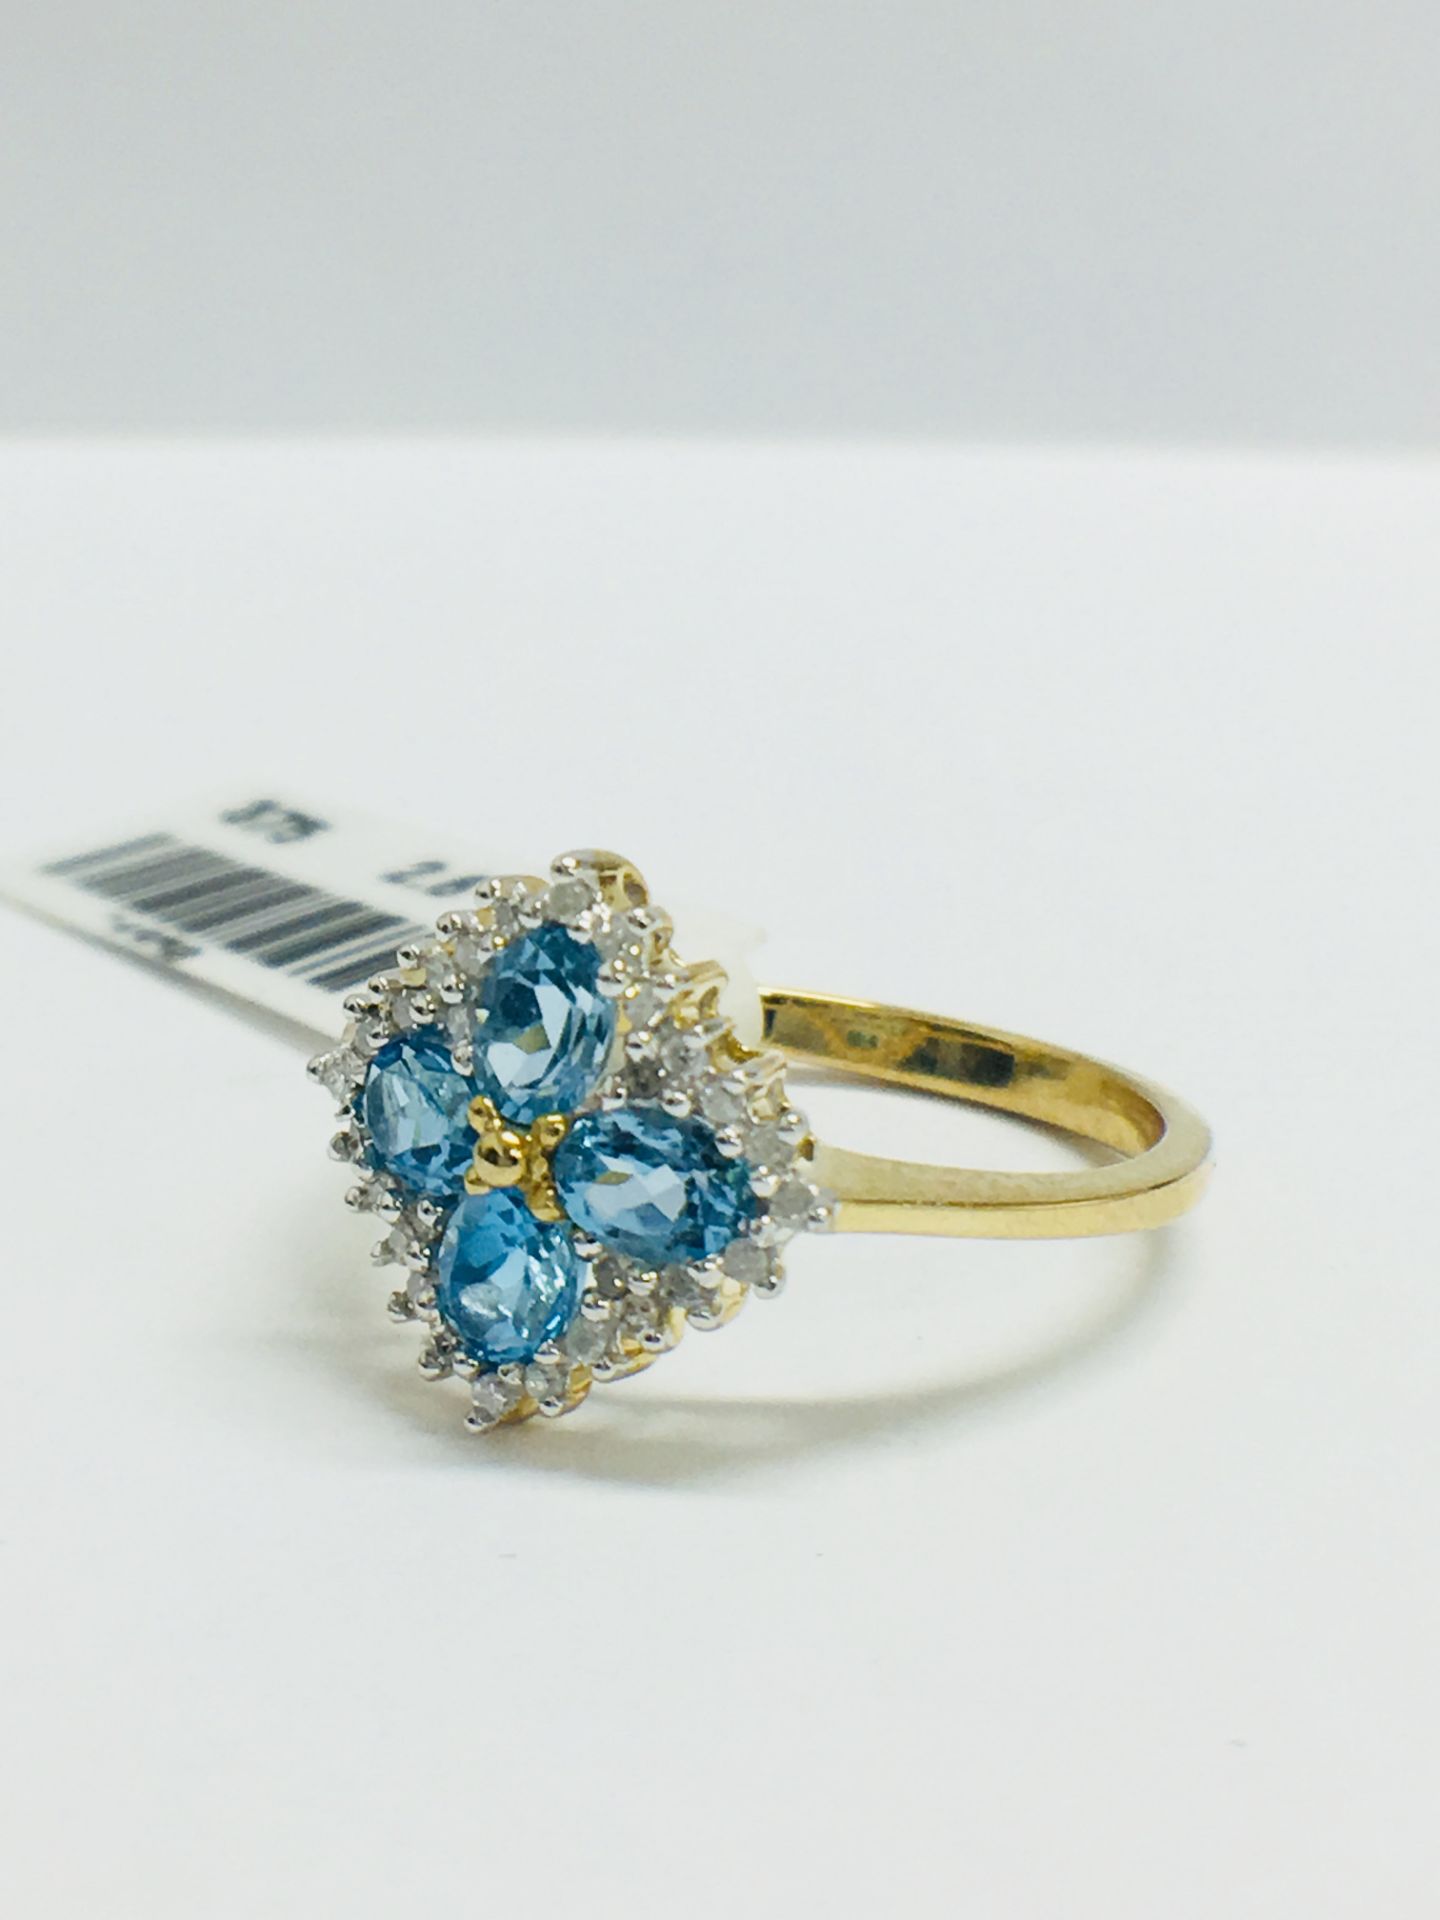 9Ct Yellow Gold Blue Topaz Diamond Cluster Ring - Image 2 of 9